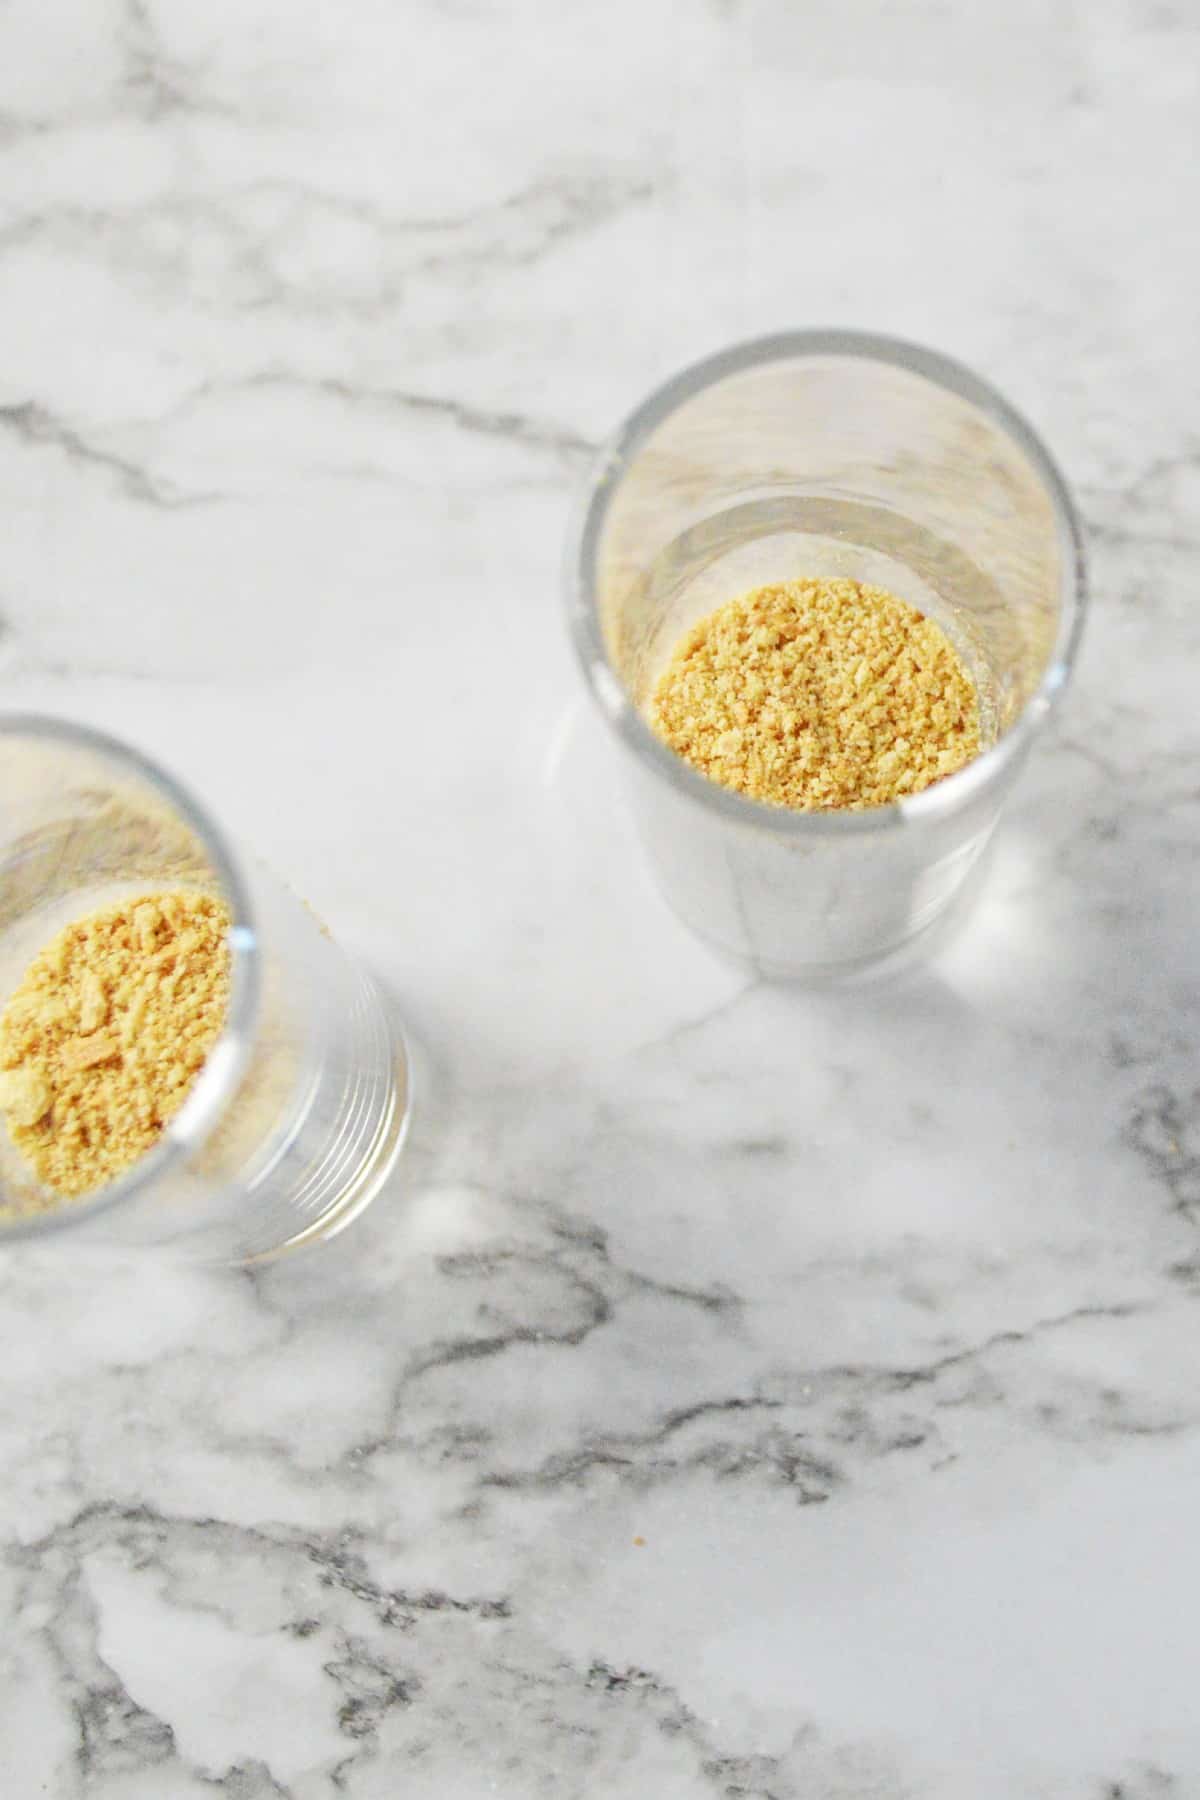 Another process is to add graham crumbs to your mixture for a perfect Champagne Cheesecake Shooter experience